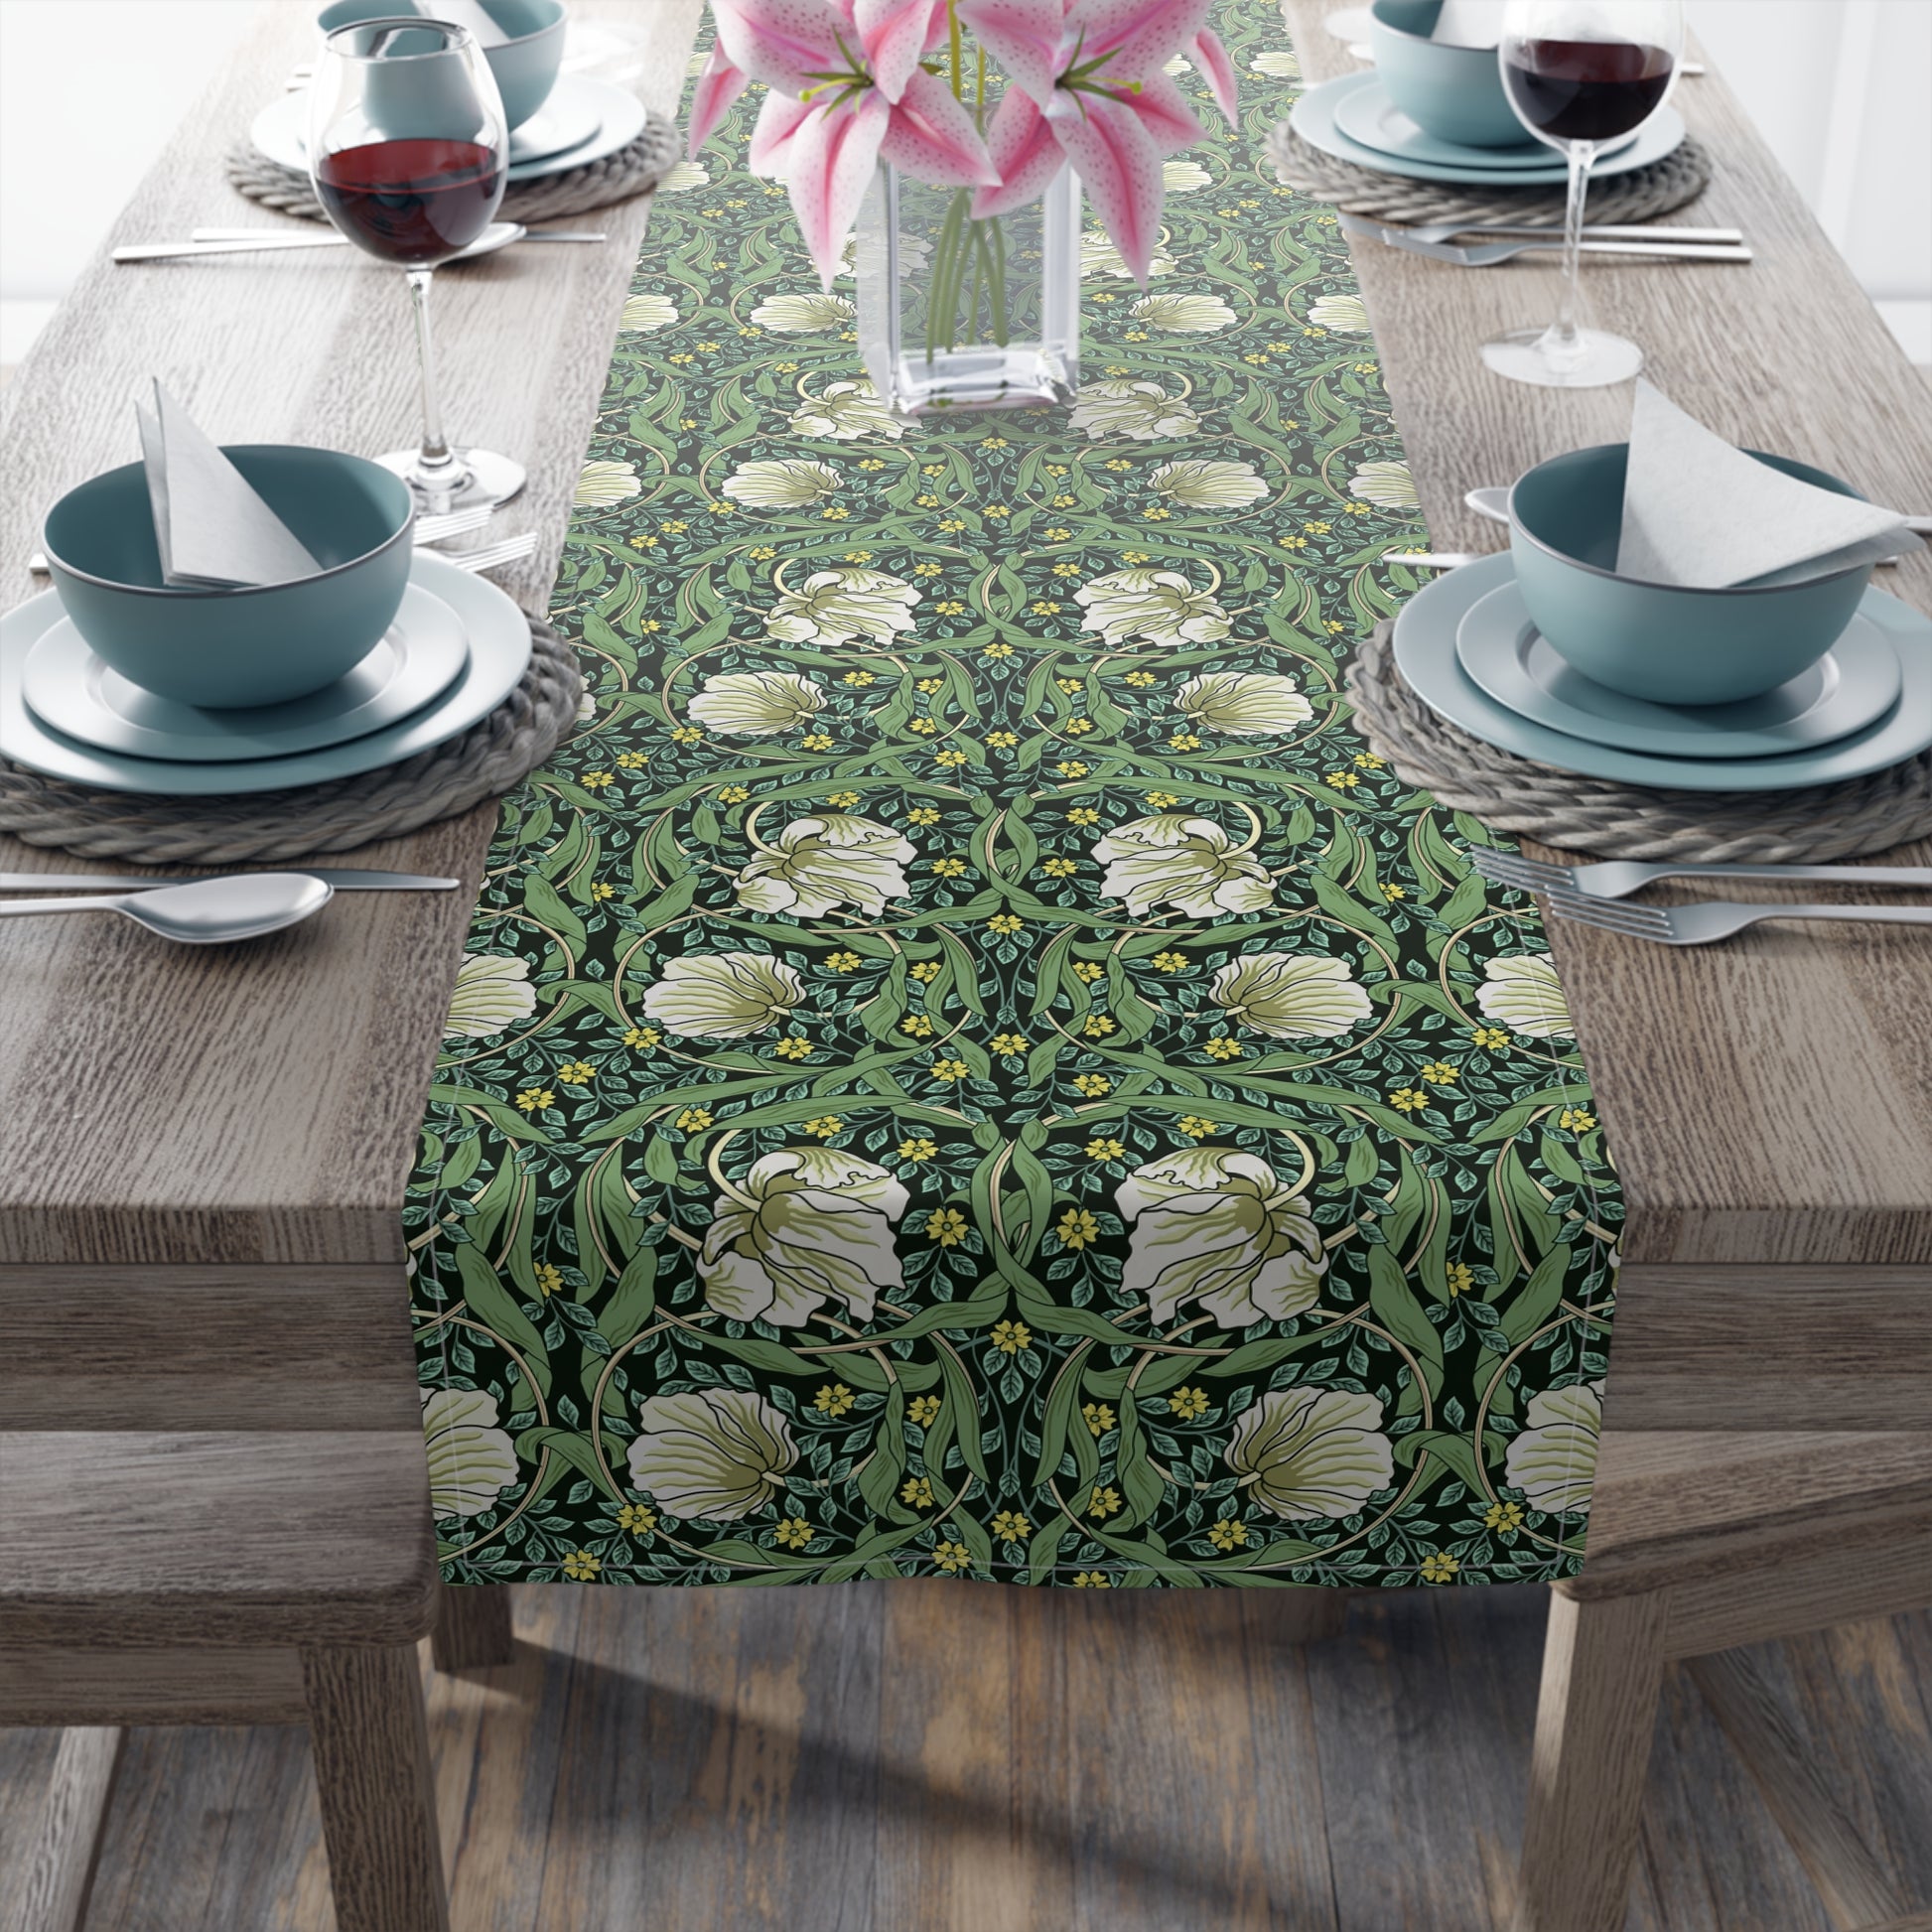 william-morris-co-table-runner-pimpernel-collection-green-7